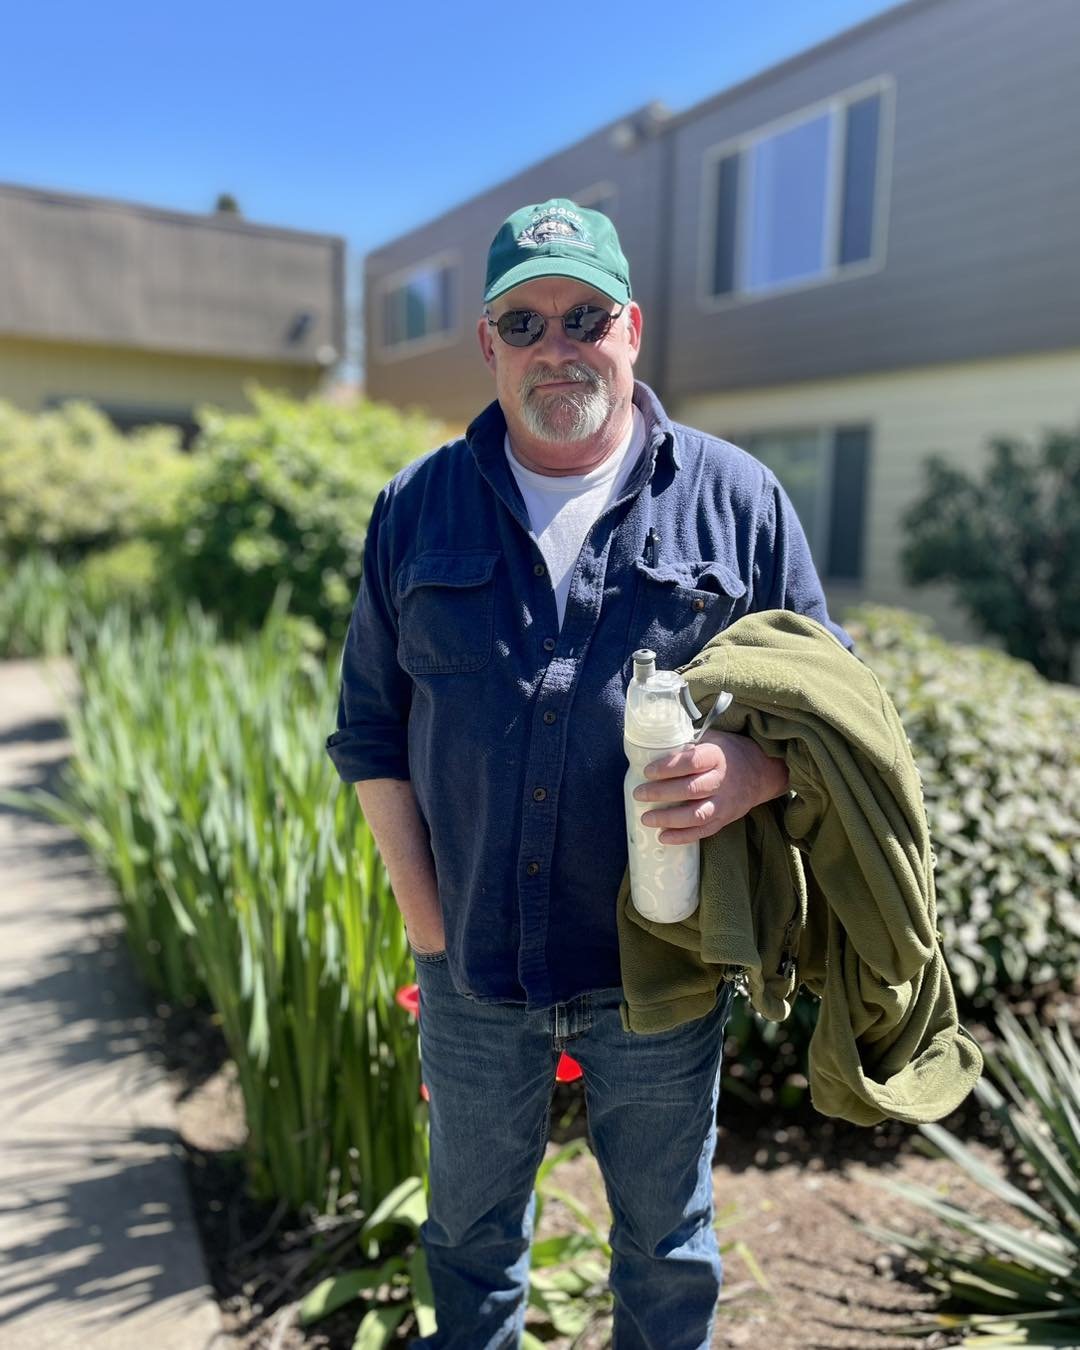 Sean&rsquo;s story from homelessness to a better future involved twists and turns, from Portland to Nevada, but he has graduated from the Eugene Mission&rsquo;s R3 Program and is moving into permanent housing! 

The Army vet was homeless before he go